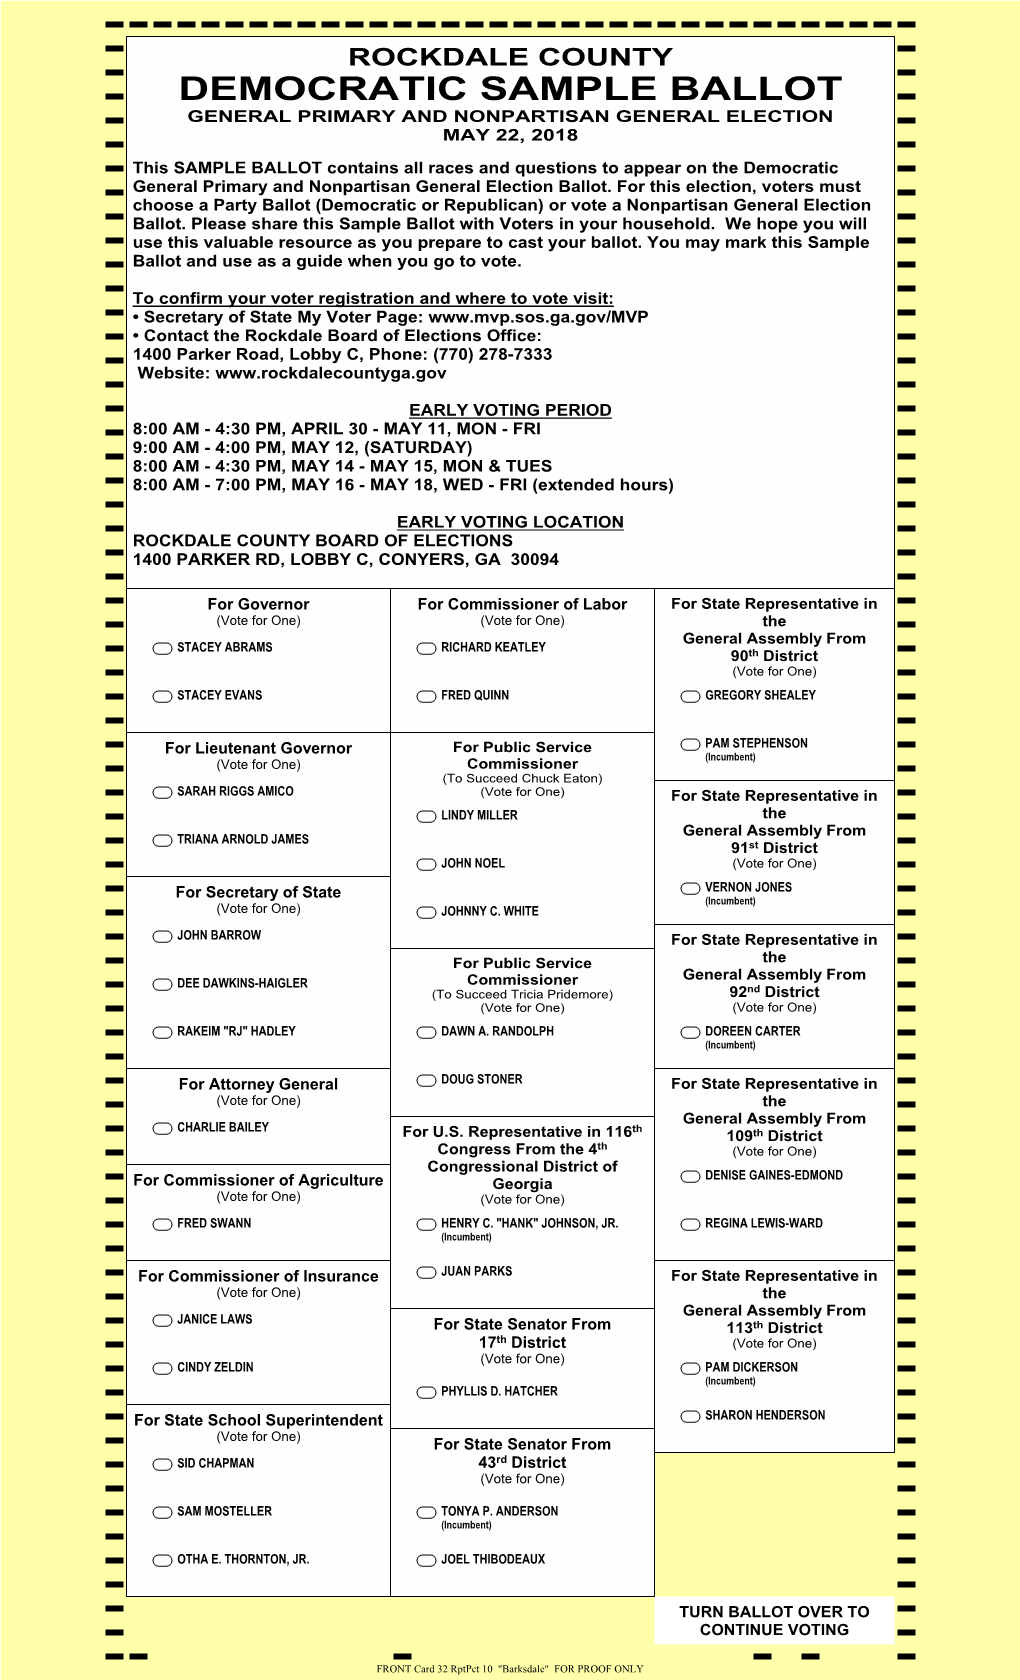 Democratic Sample Ballot General Primary and Nonpartisan General Election May 22, 2018